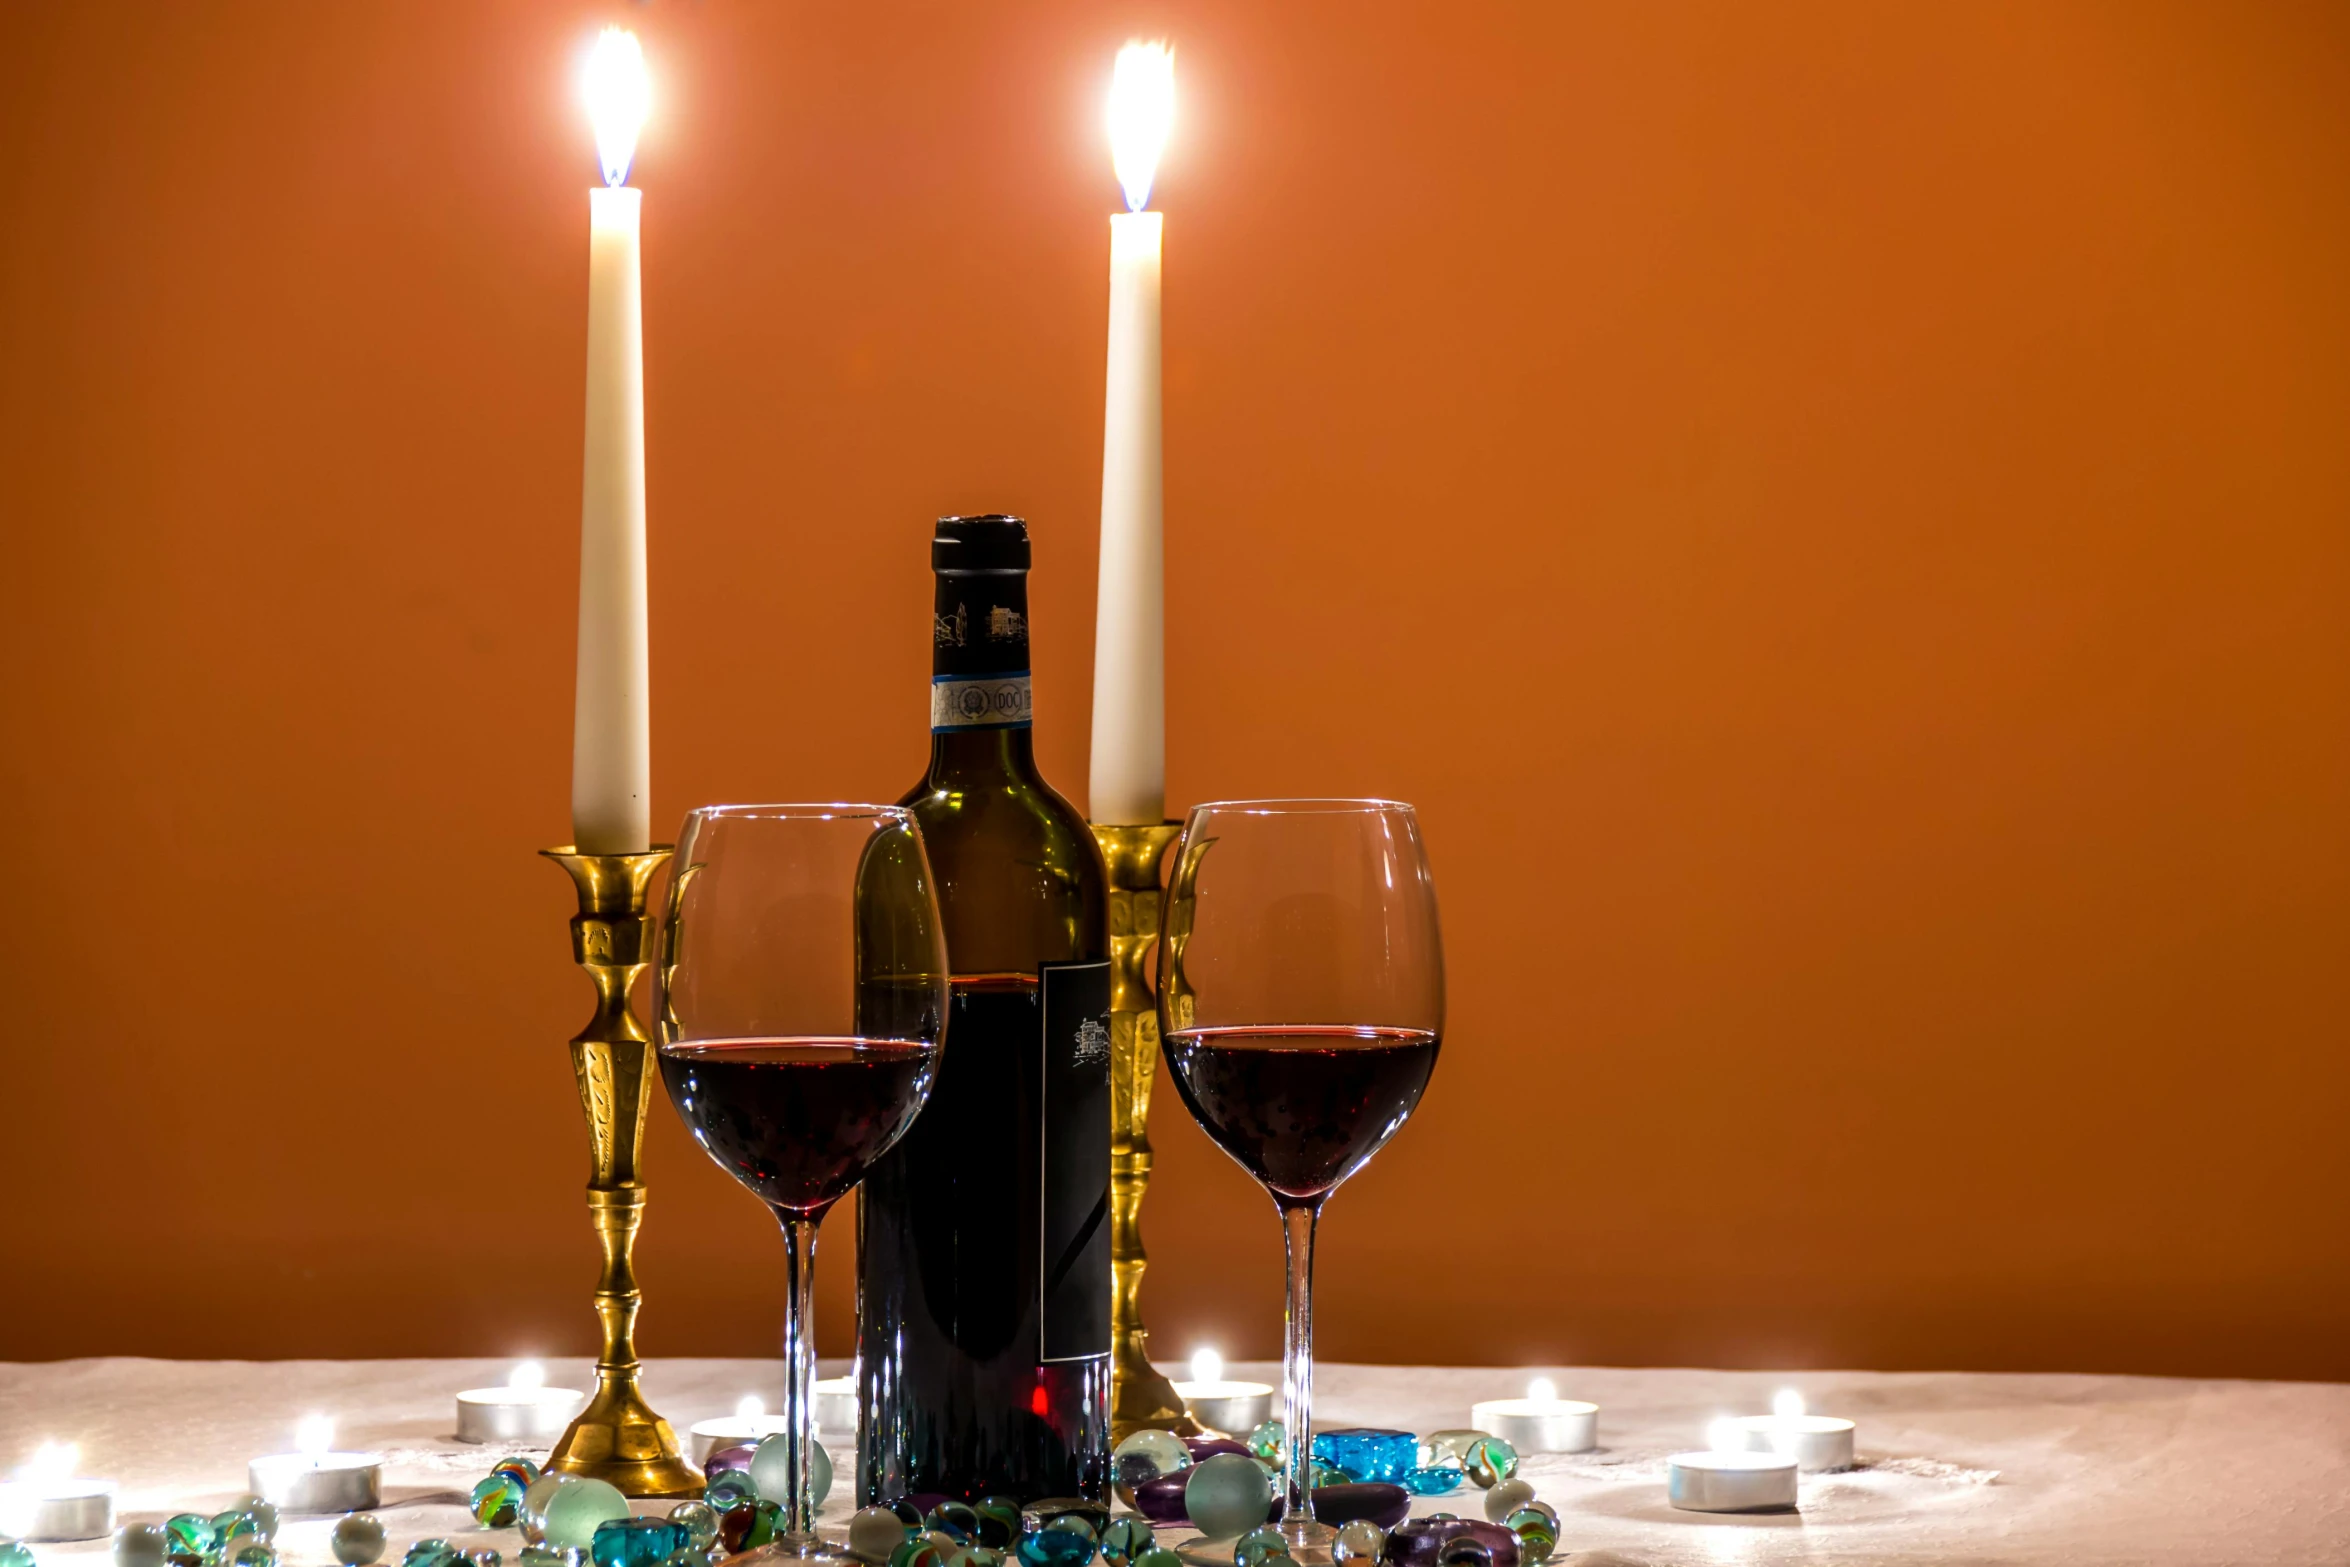 a table topped with two wine glasses and a bottle of wine, pexels contest winner, romanticism, natural candle lighting, gemstones and treasures, profile image, velvet tablecloth